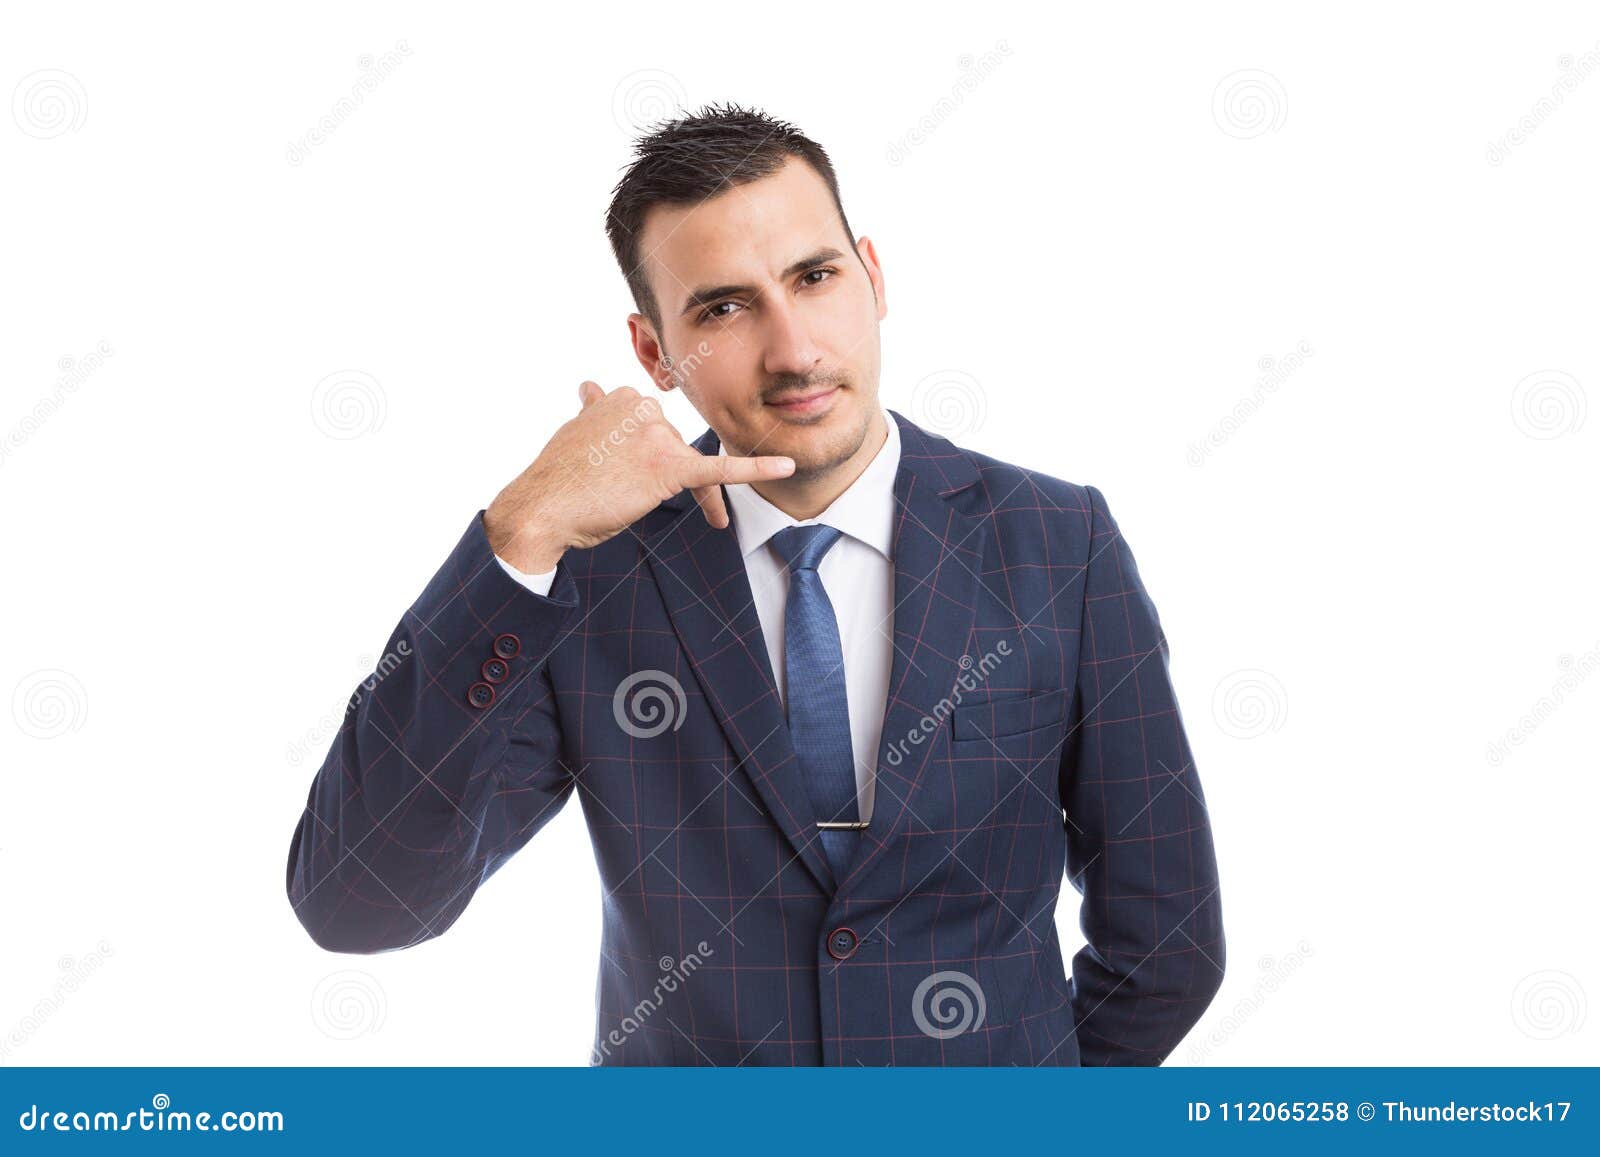 Business Man Contact Person Making Call Us Gesture Stock Photo - Image ...